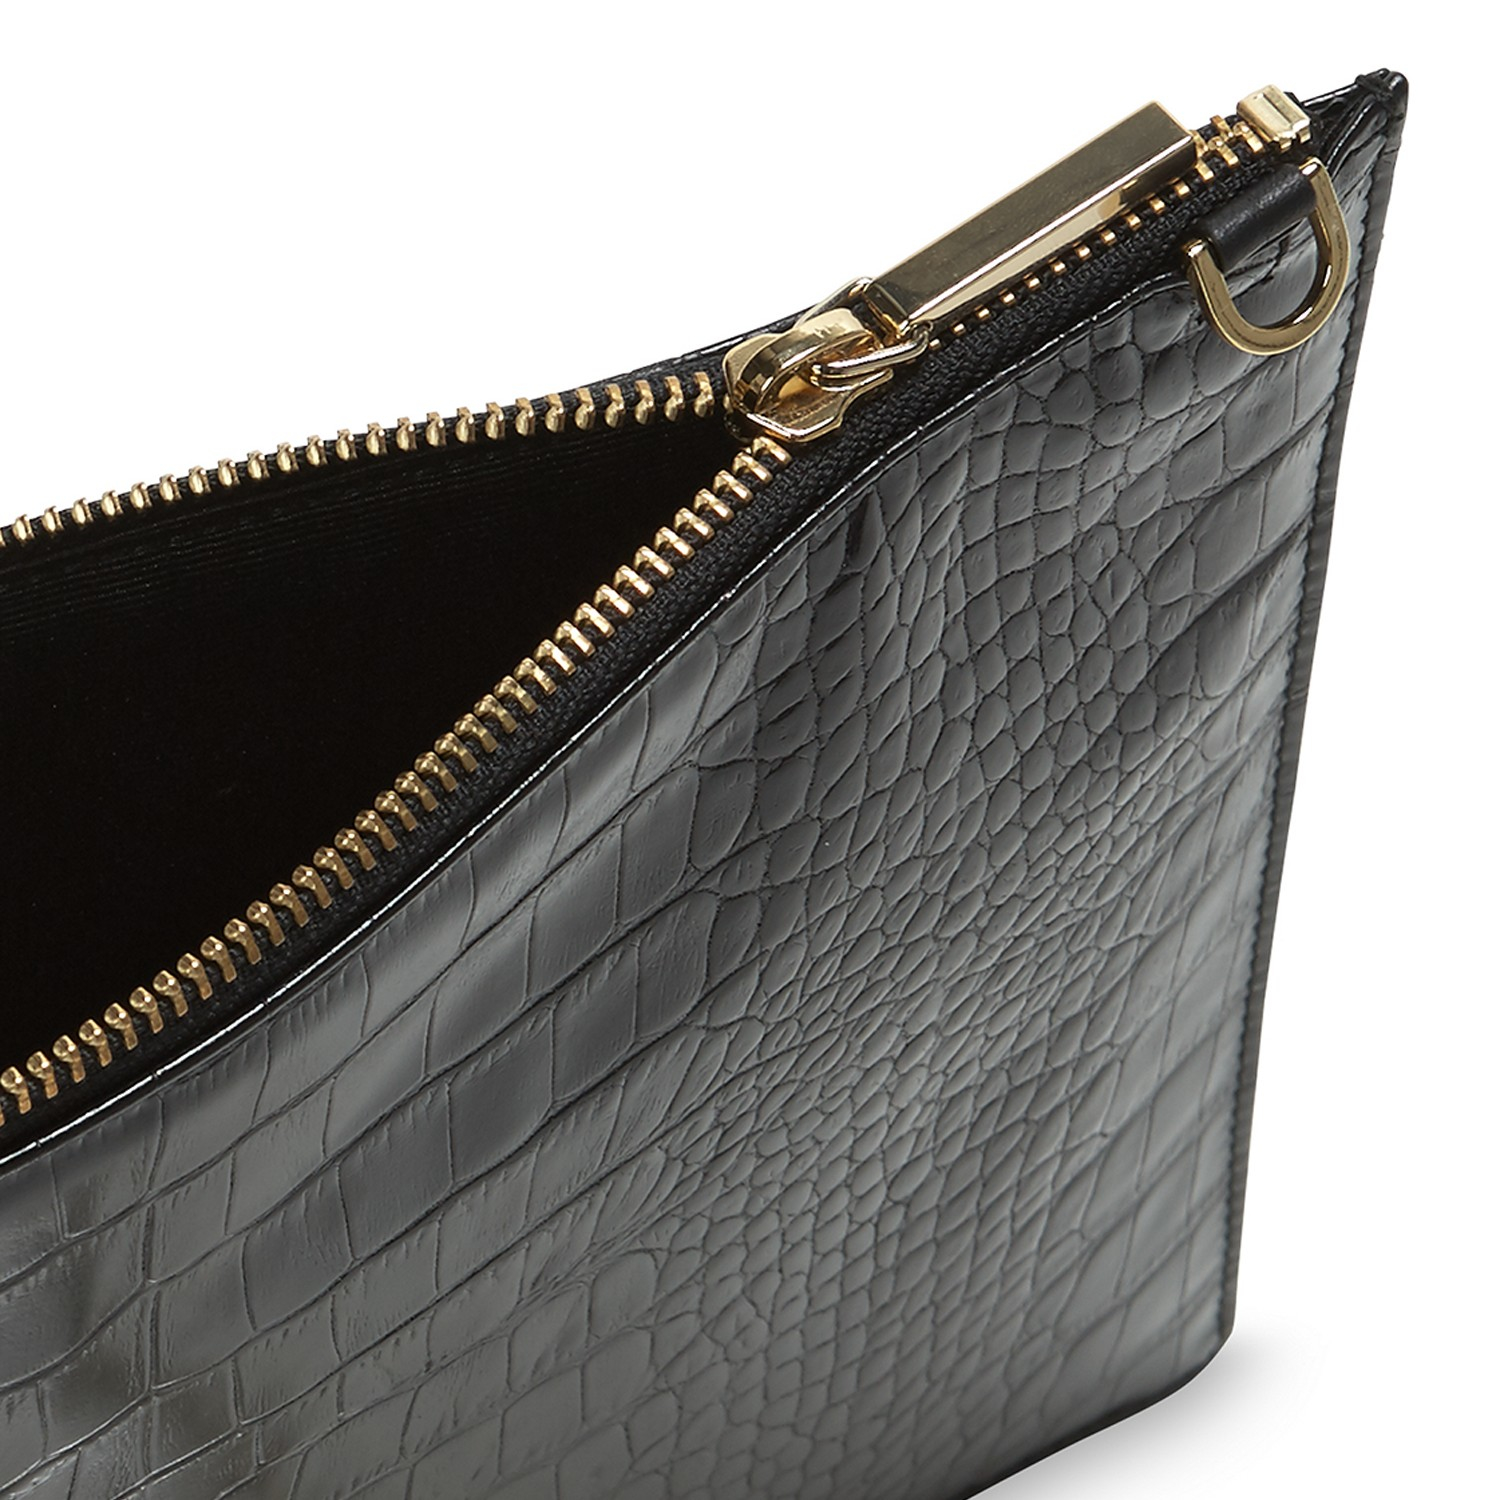 Whistles Rivington Shiny Croc Leather Chain Clutch Bag in Black - Lyst